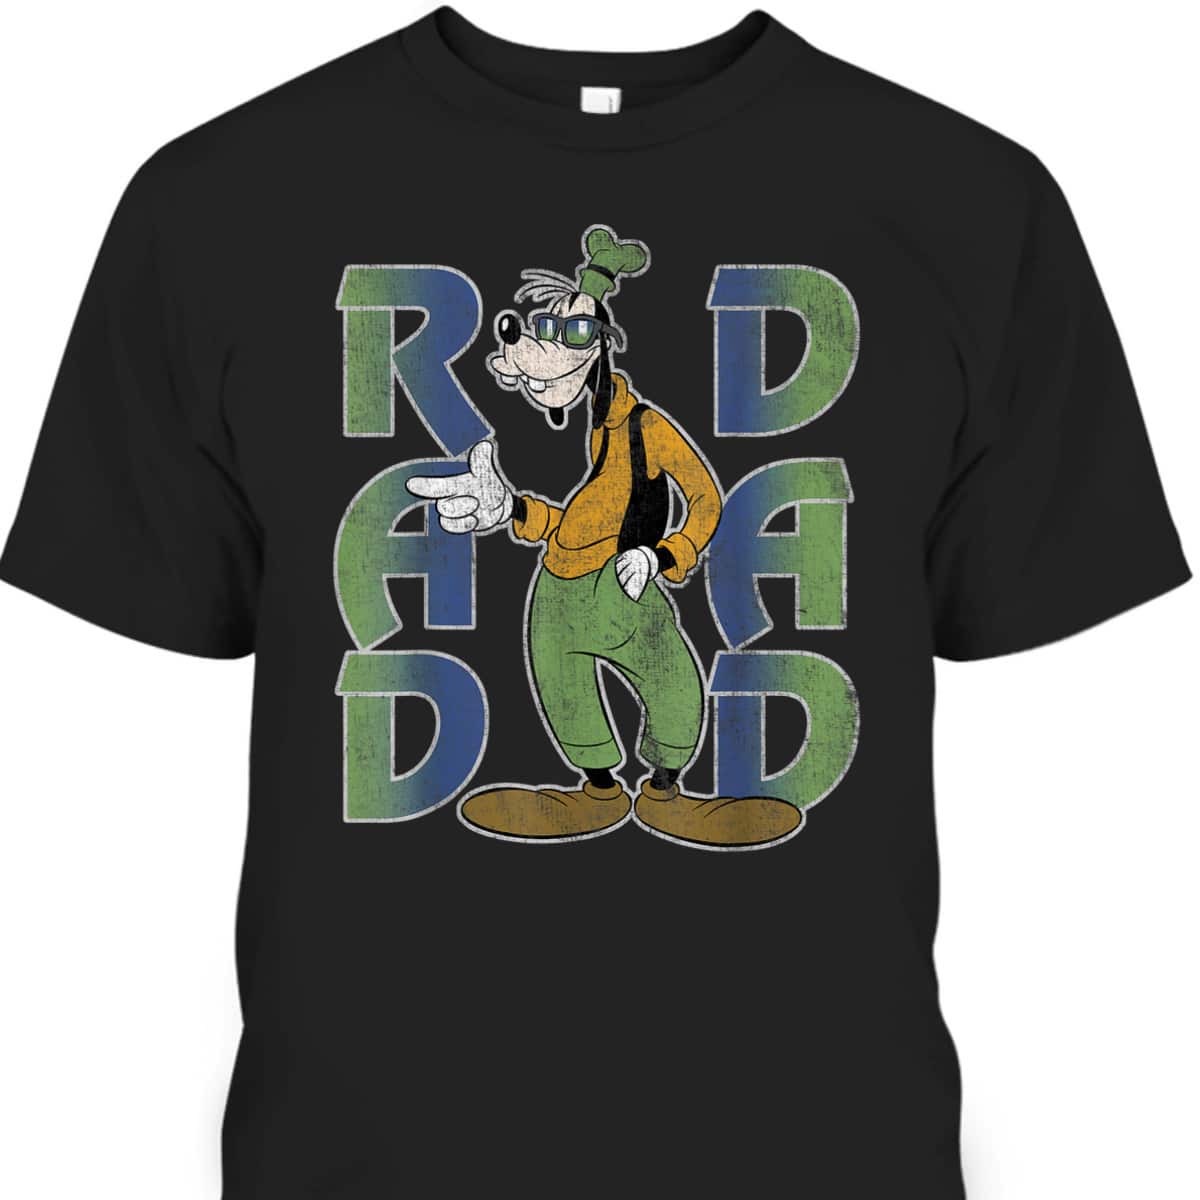 Goofy Father's Day T-Shirt Rad Dad Gift For Marvel Fans